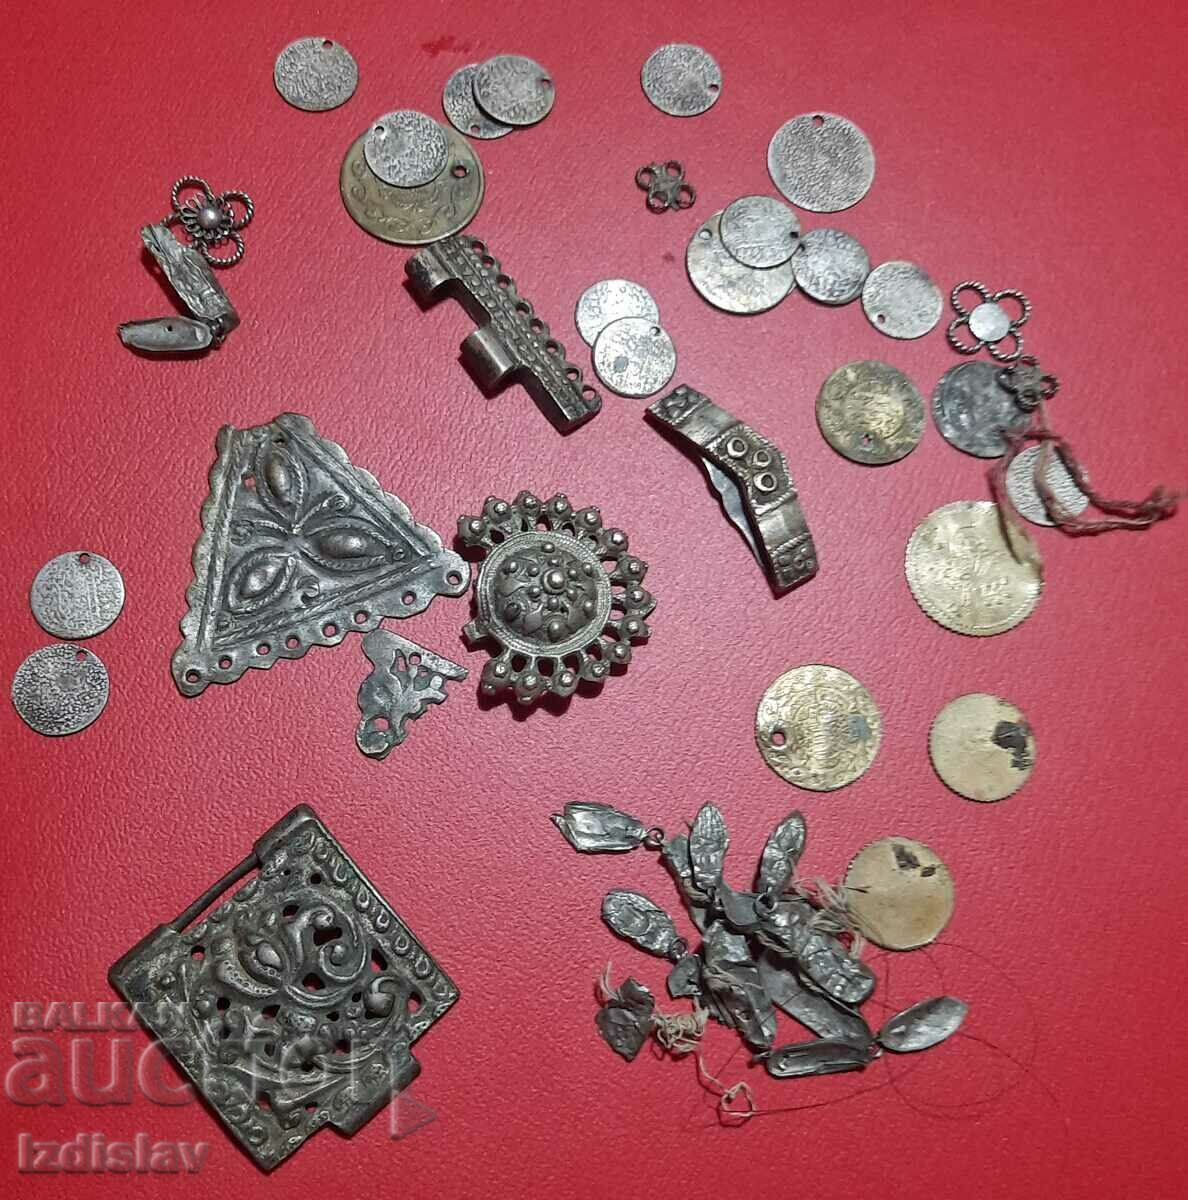 Old pieces of jewelry